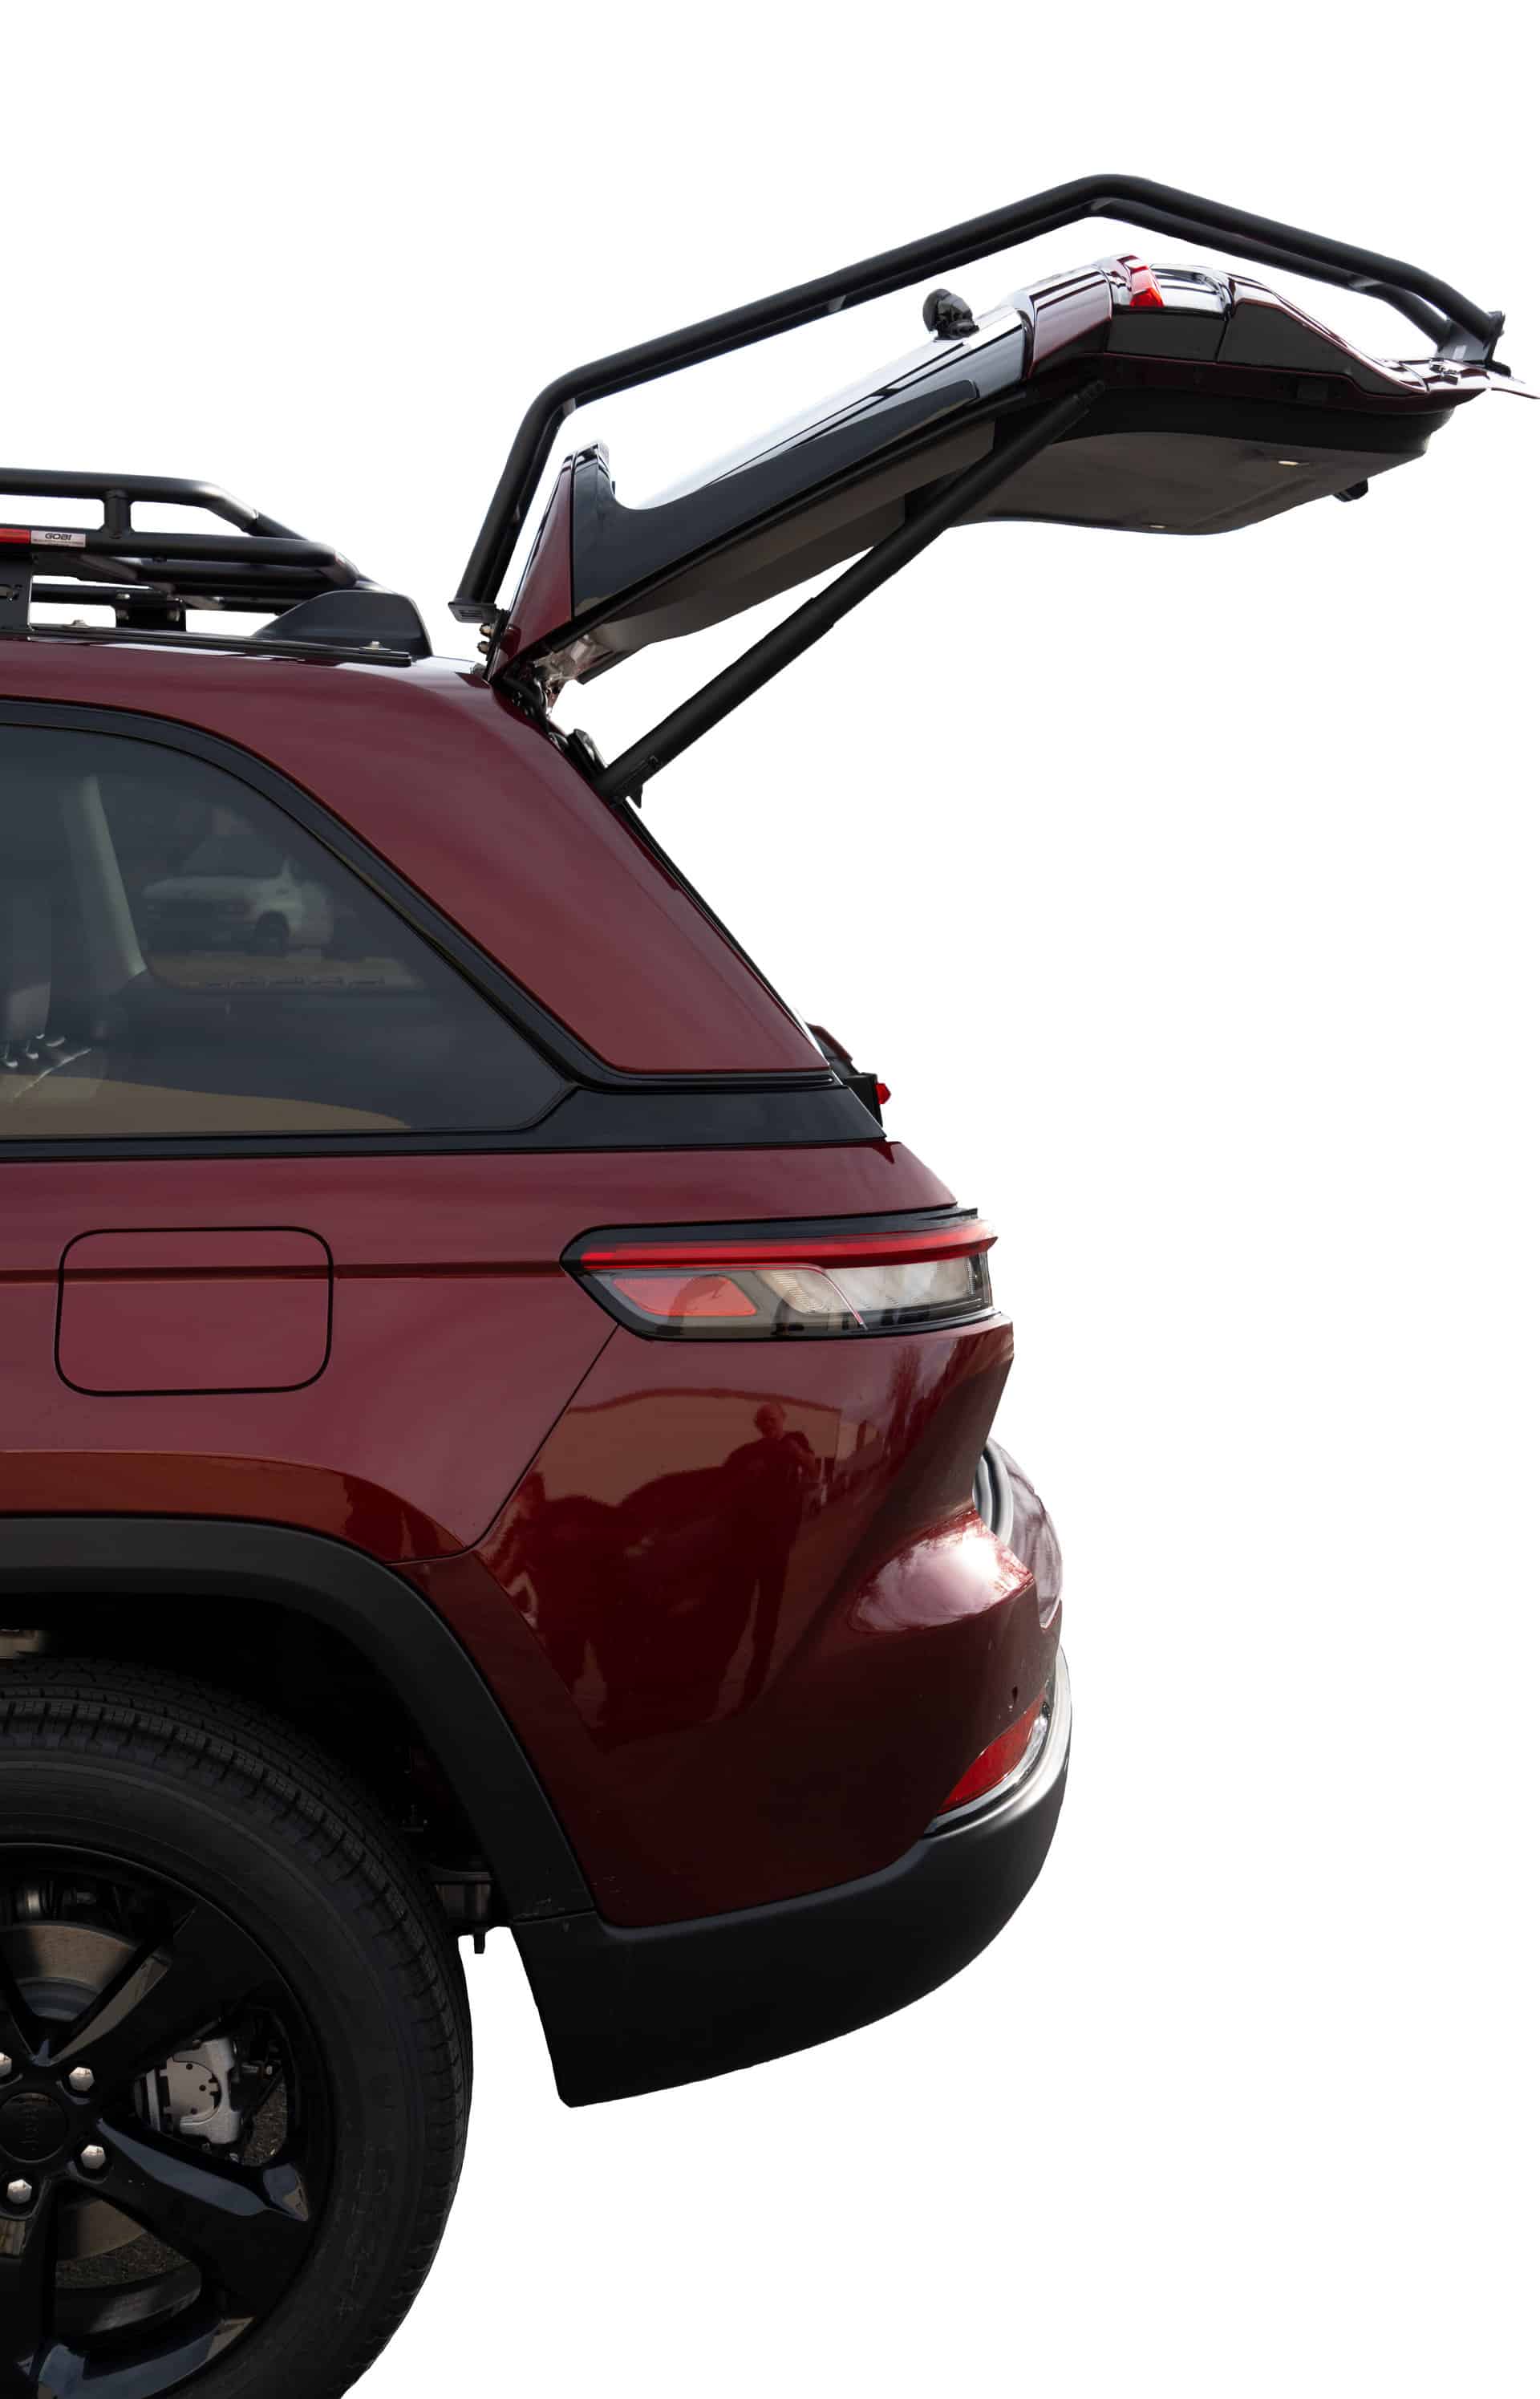 Grandcherokeel ladder 2 <b>jeep grand cherokee 4xe<br></b> low-profile roof rack<font color ="dodgerblue"><br>multi light no sunroof - stealth</font>